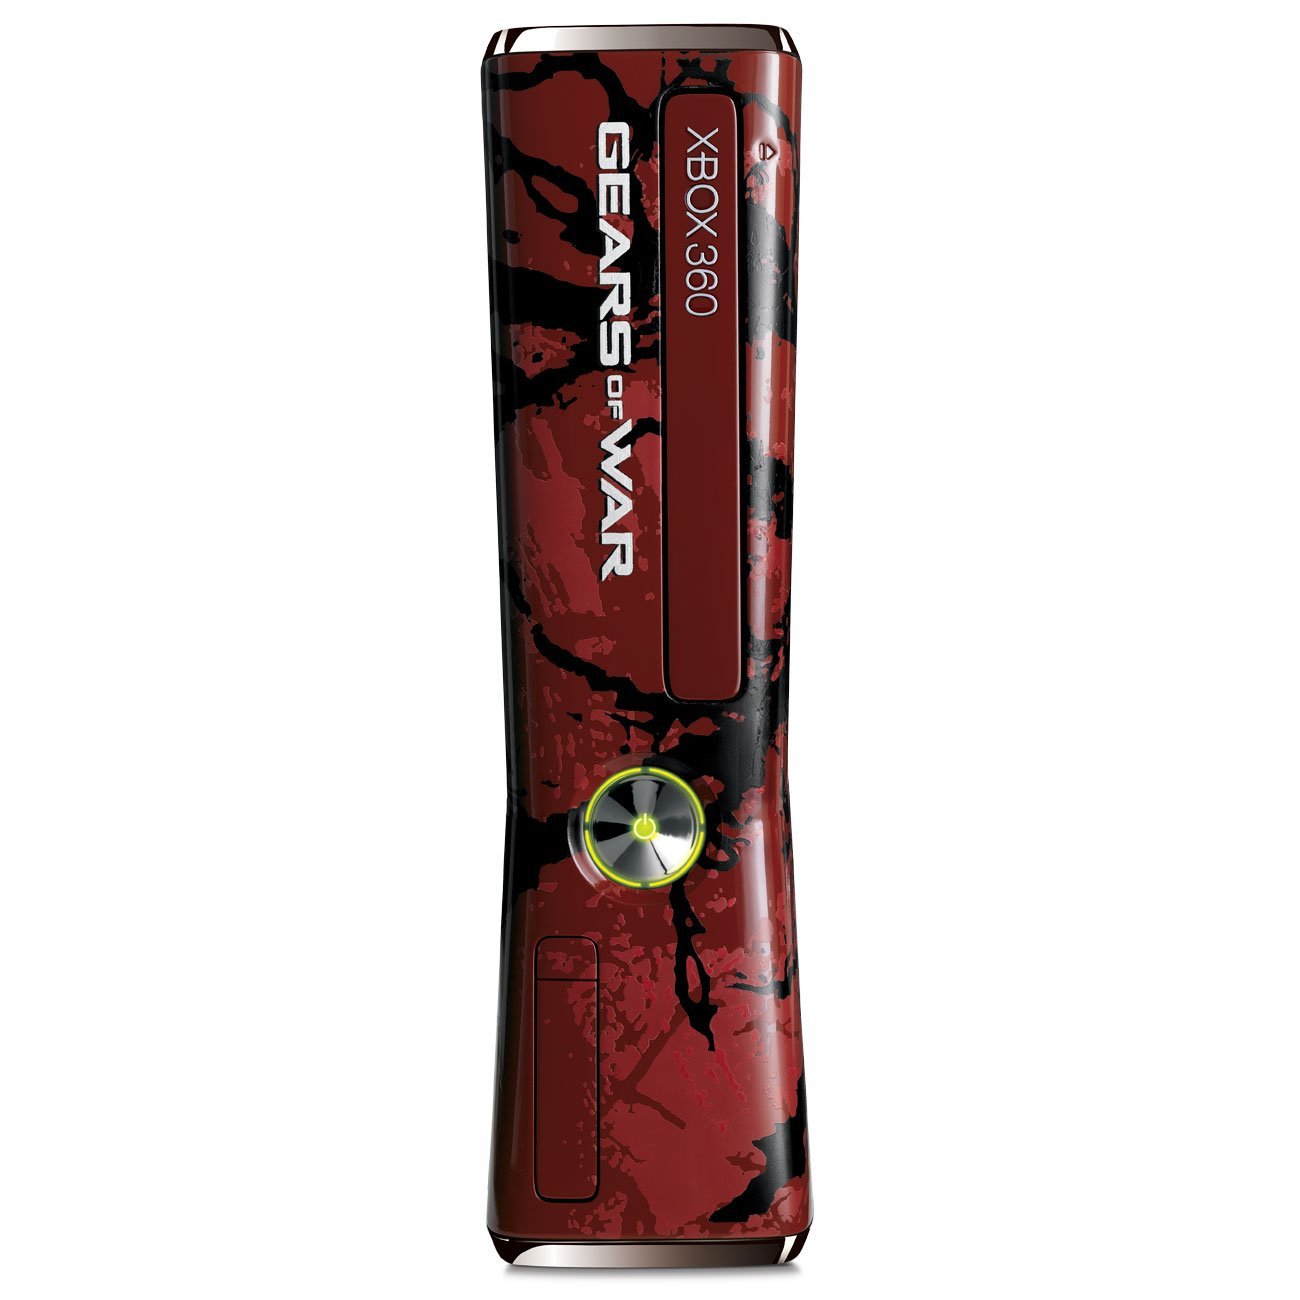 http://thetechjournal.com/wp-content/uploads/images/1108/1312642487-xbox-360-limited-edition-gears-of-war-3-wireless-controllers-5.jpg